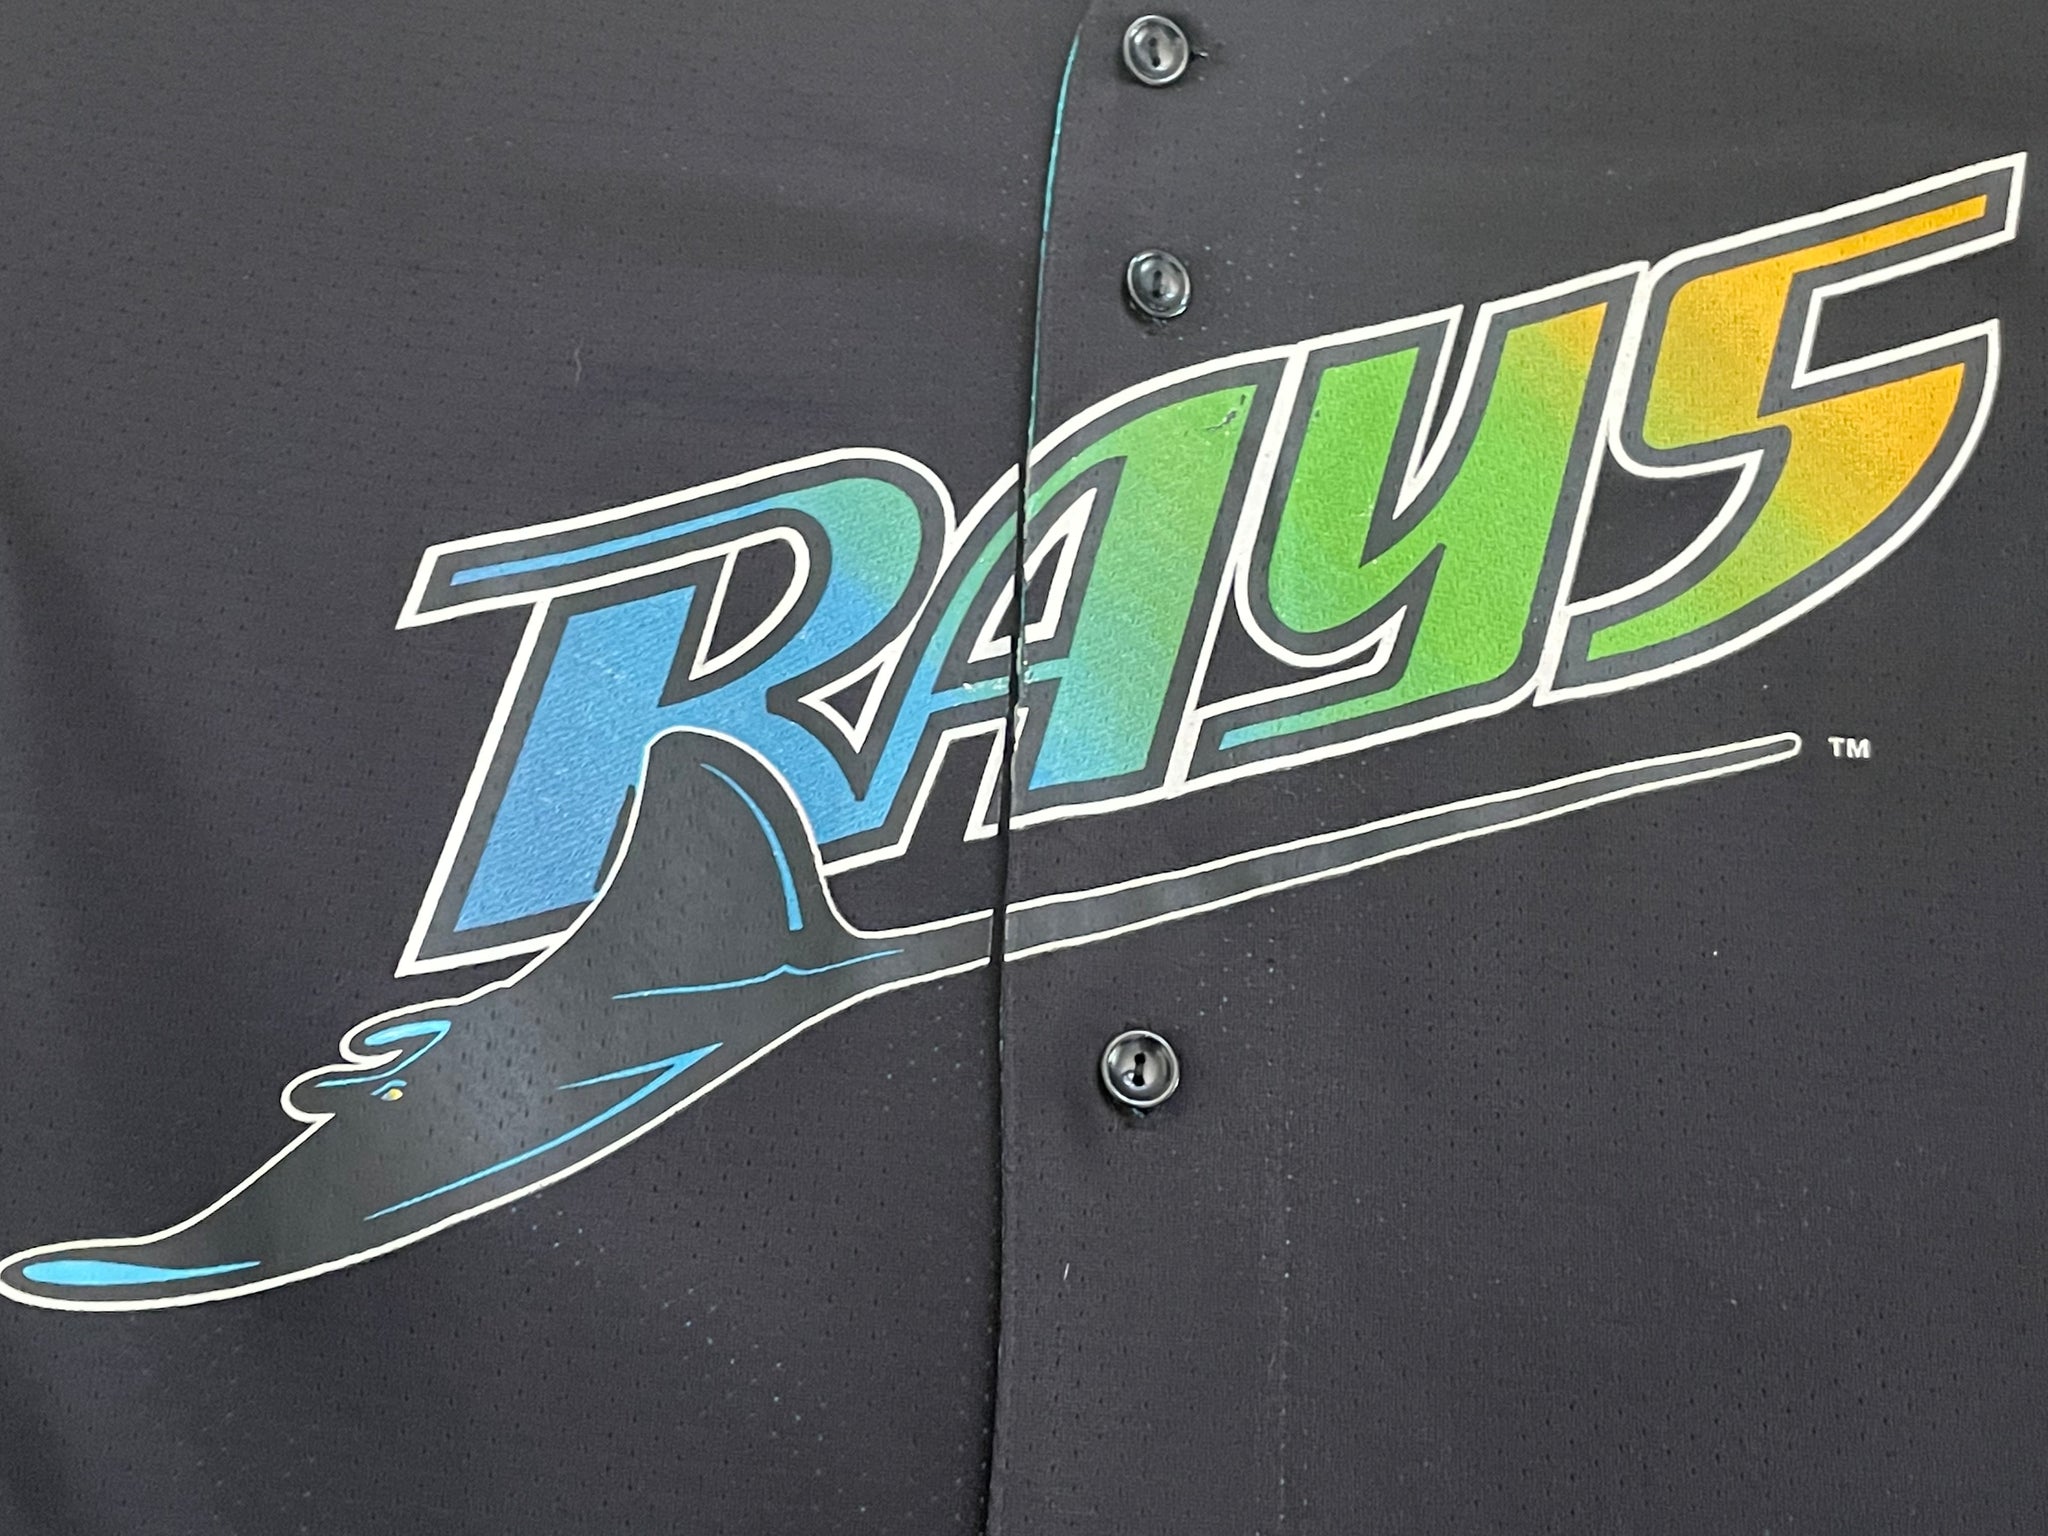 tampa bay rays old jersey